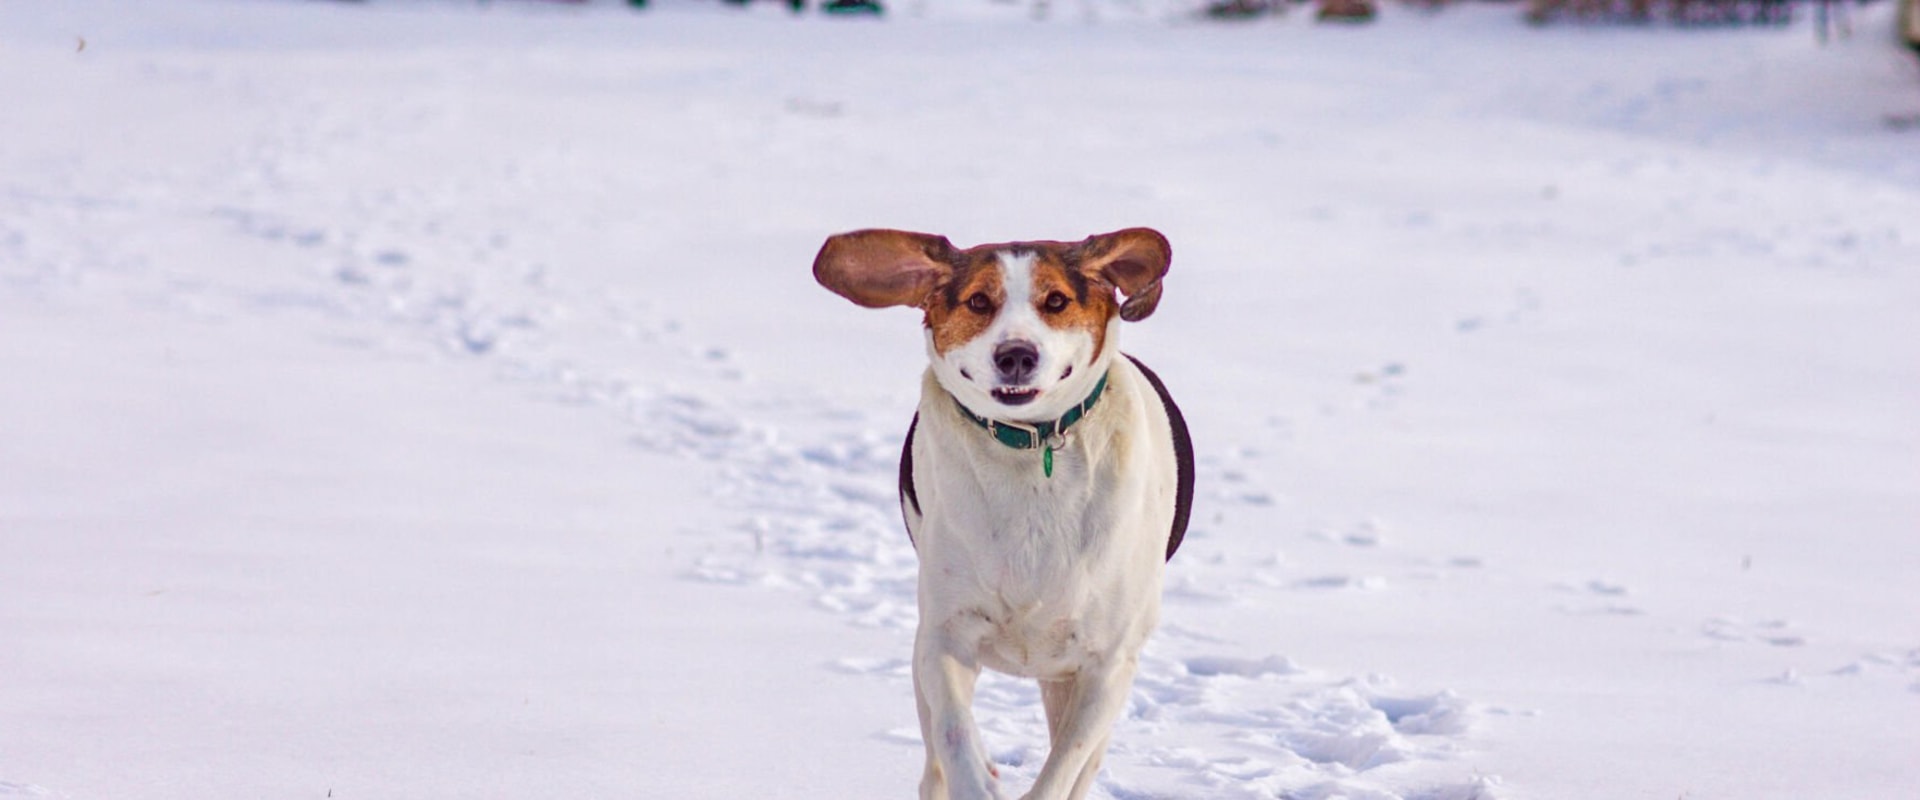 Bringing Your Pet to Recreational Events in Anoka County: What You Need to Know